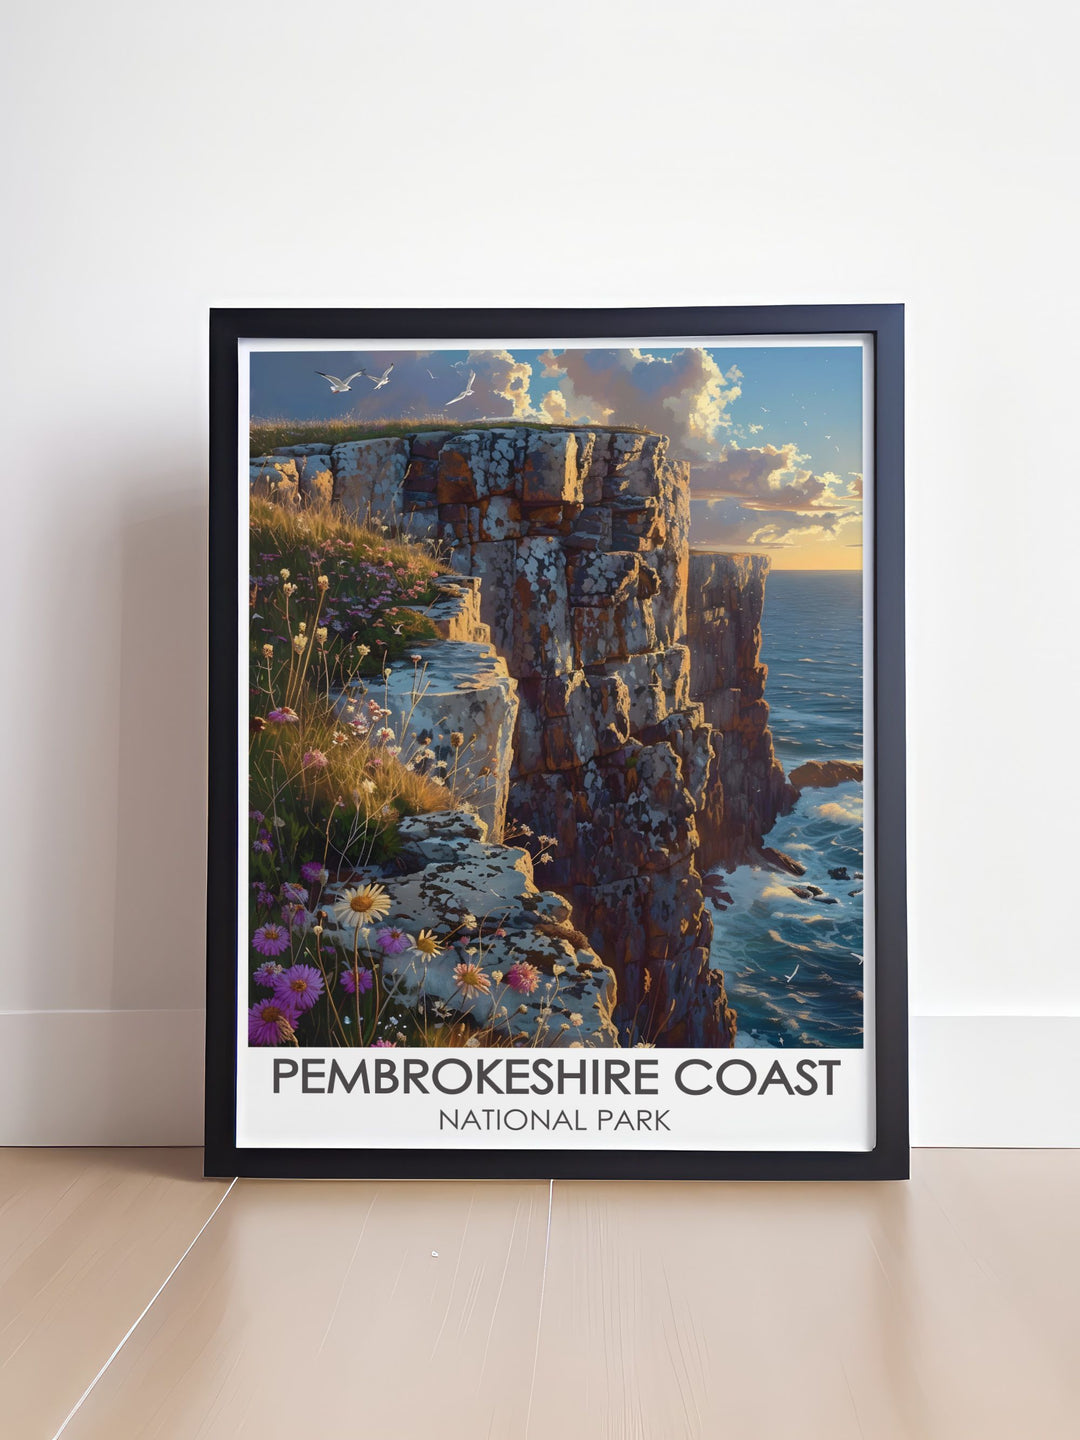 Retro travel poster of St. Davids Head with an artistic depiction of the majestic Welsh coastline blending modern artistry with classic design ideal for adding a touch of nostalgia and elegance to your home decor.